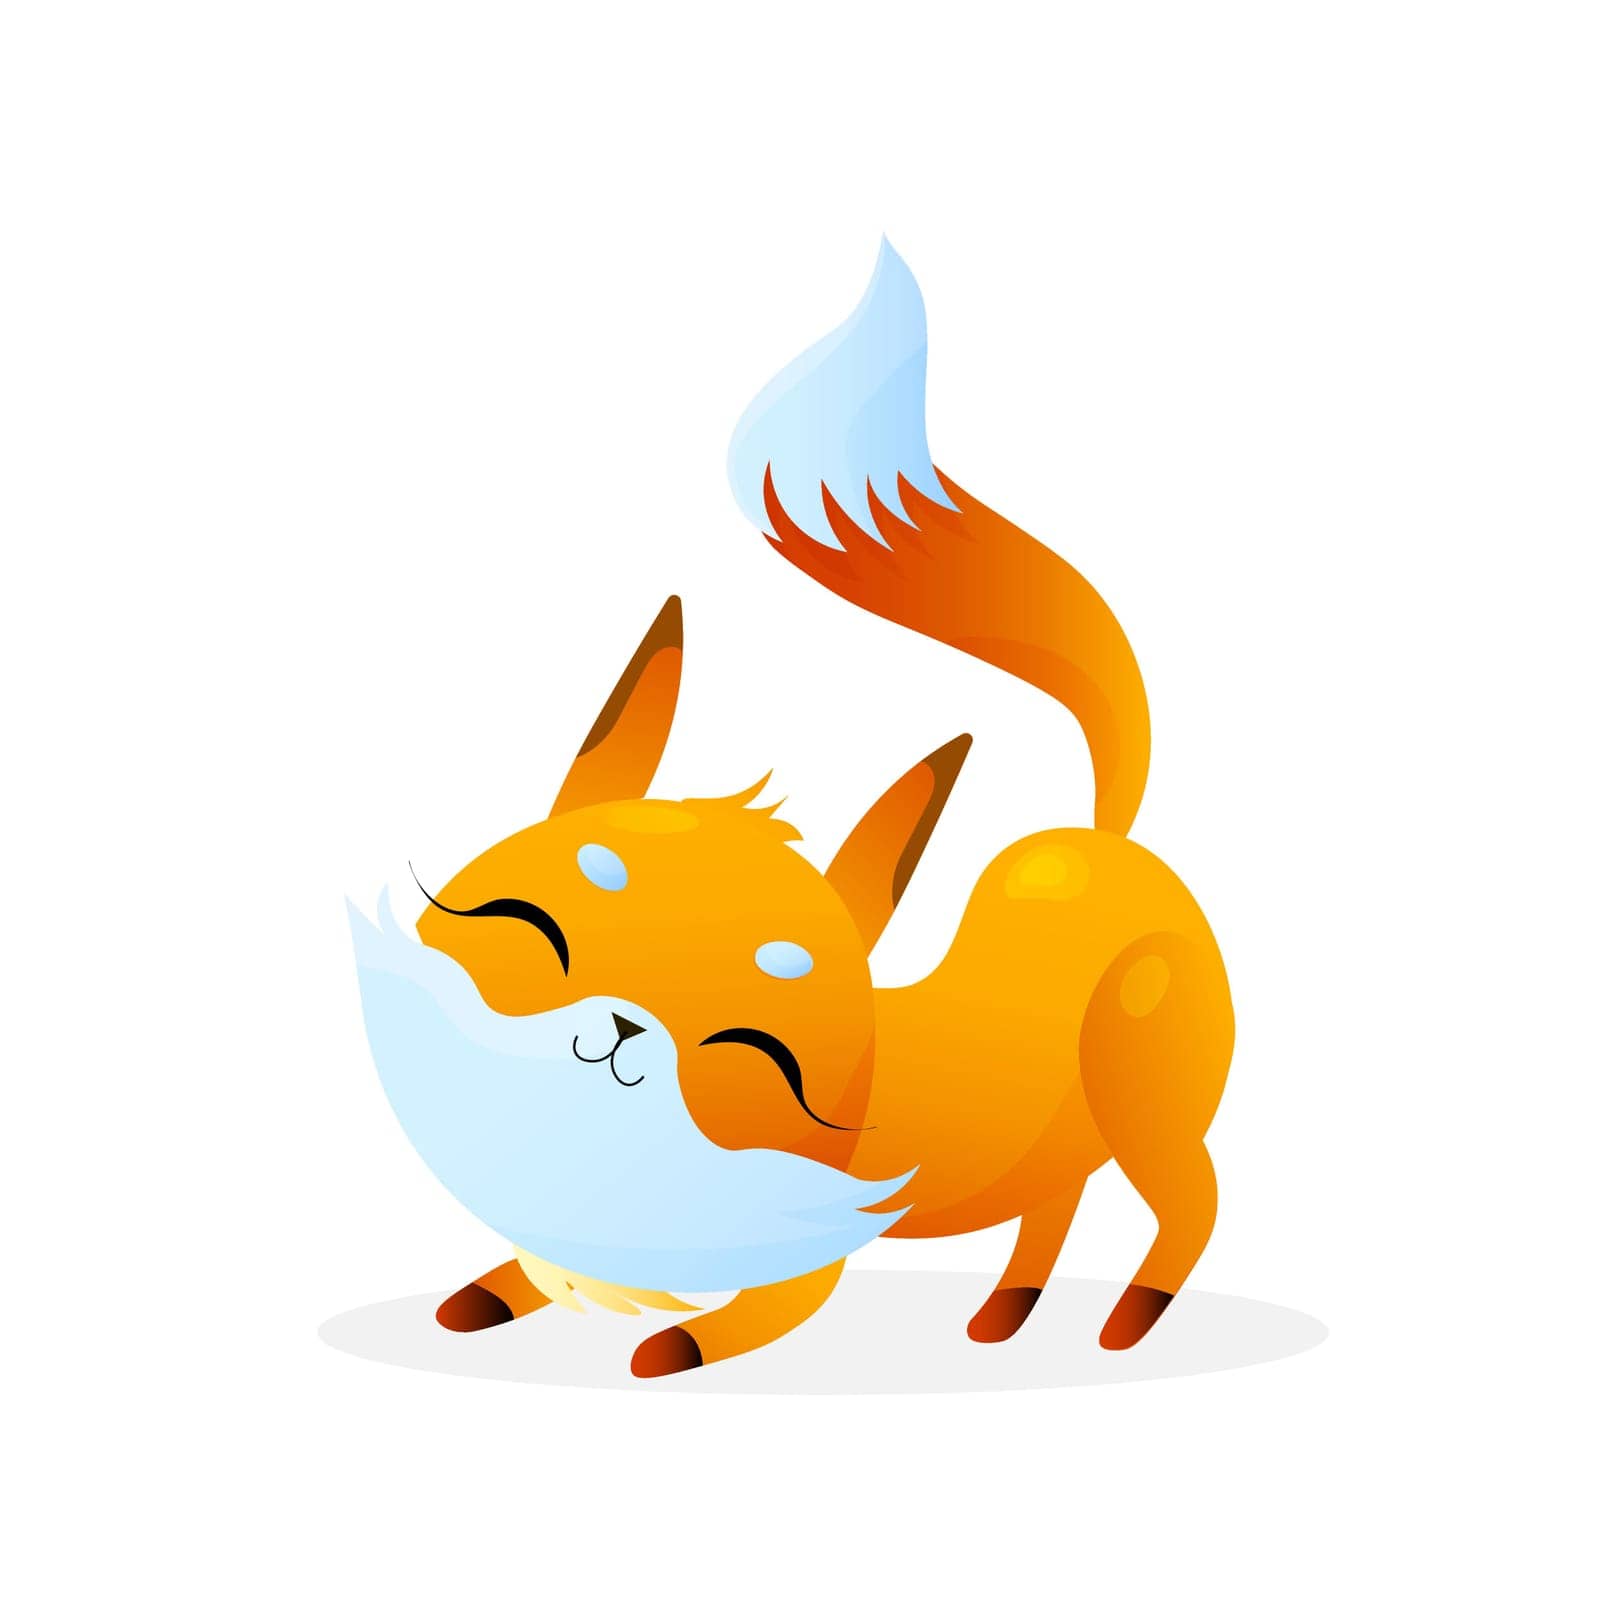 Cute cartoon fox on white background. For nature concepts, children s books illustrating, printing materials Vector illustration with simple gradients.